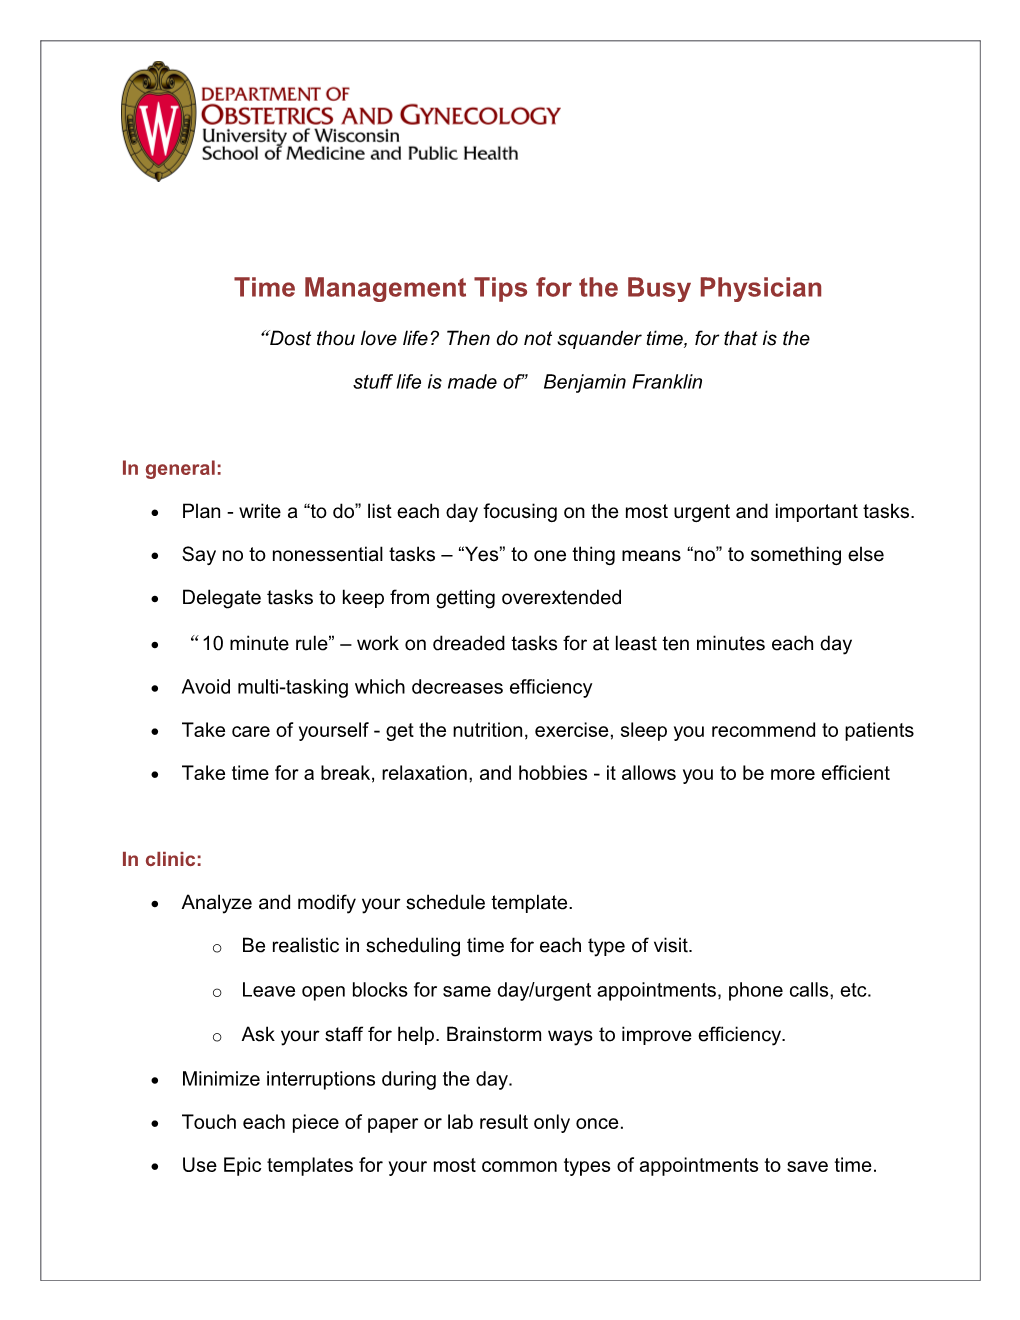 Time Management Tips for the Busy Physician